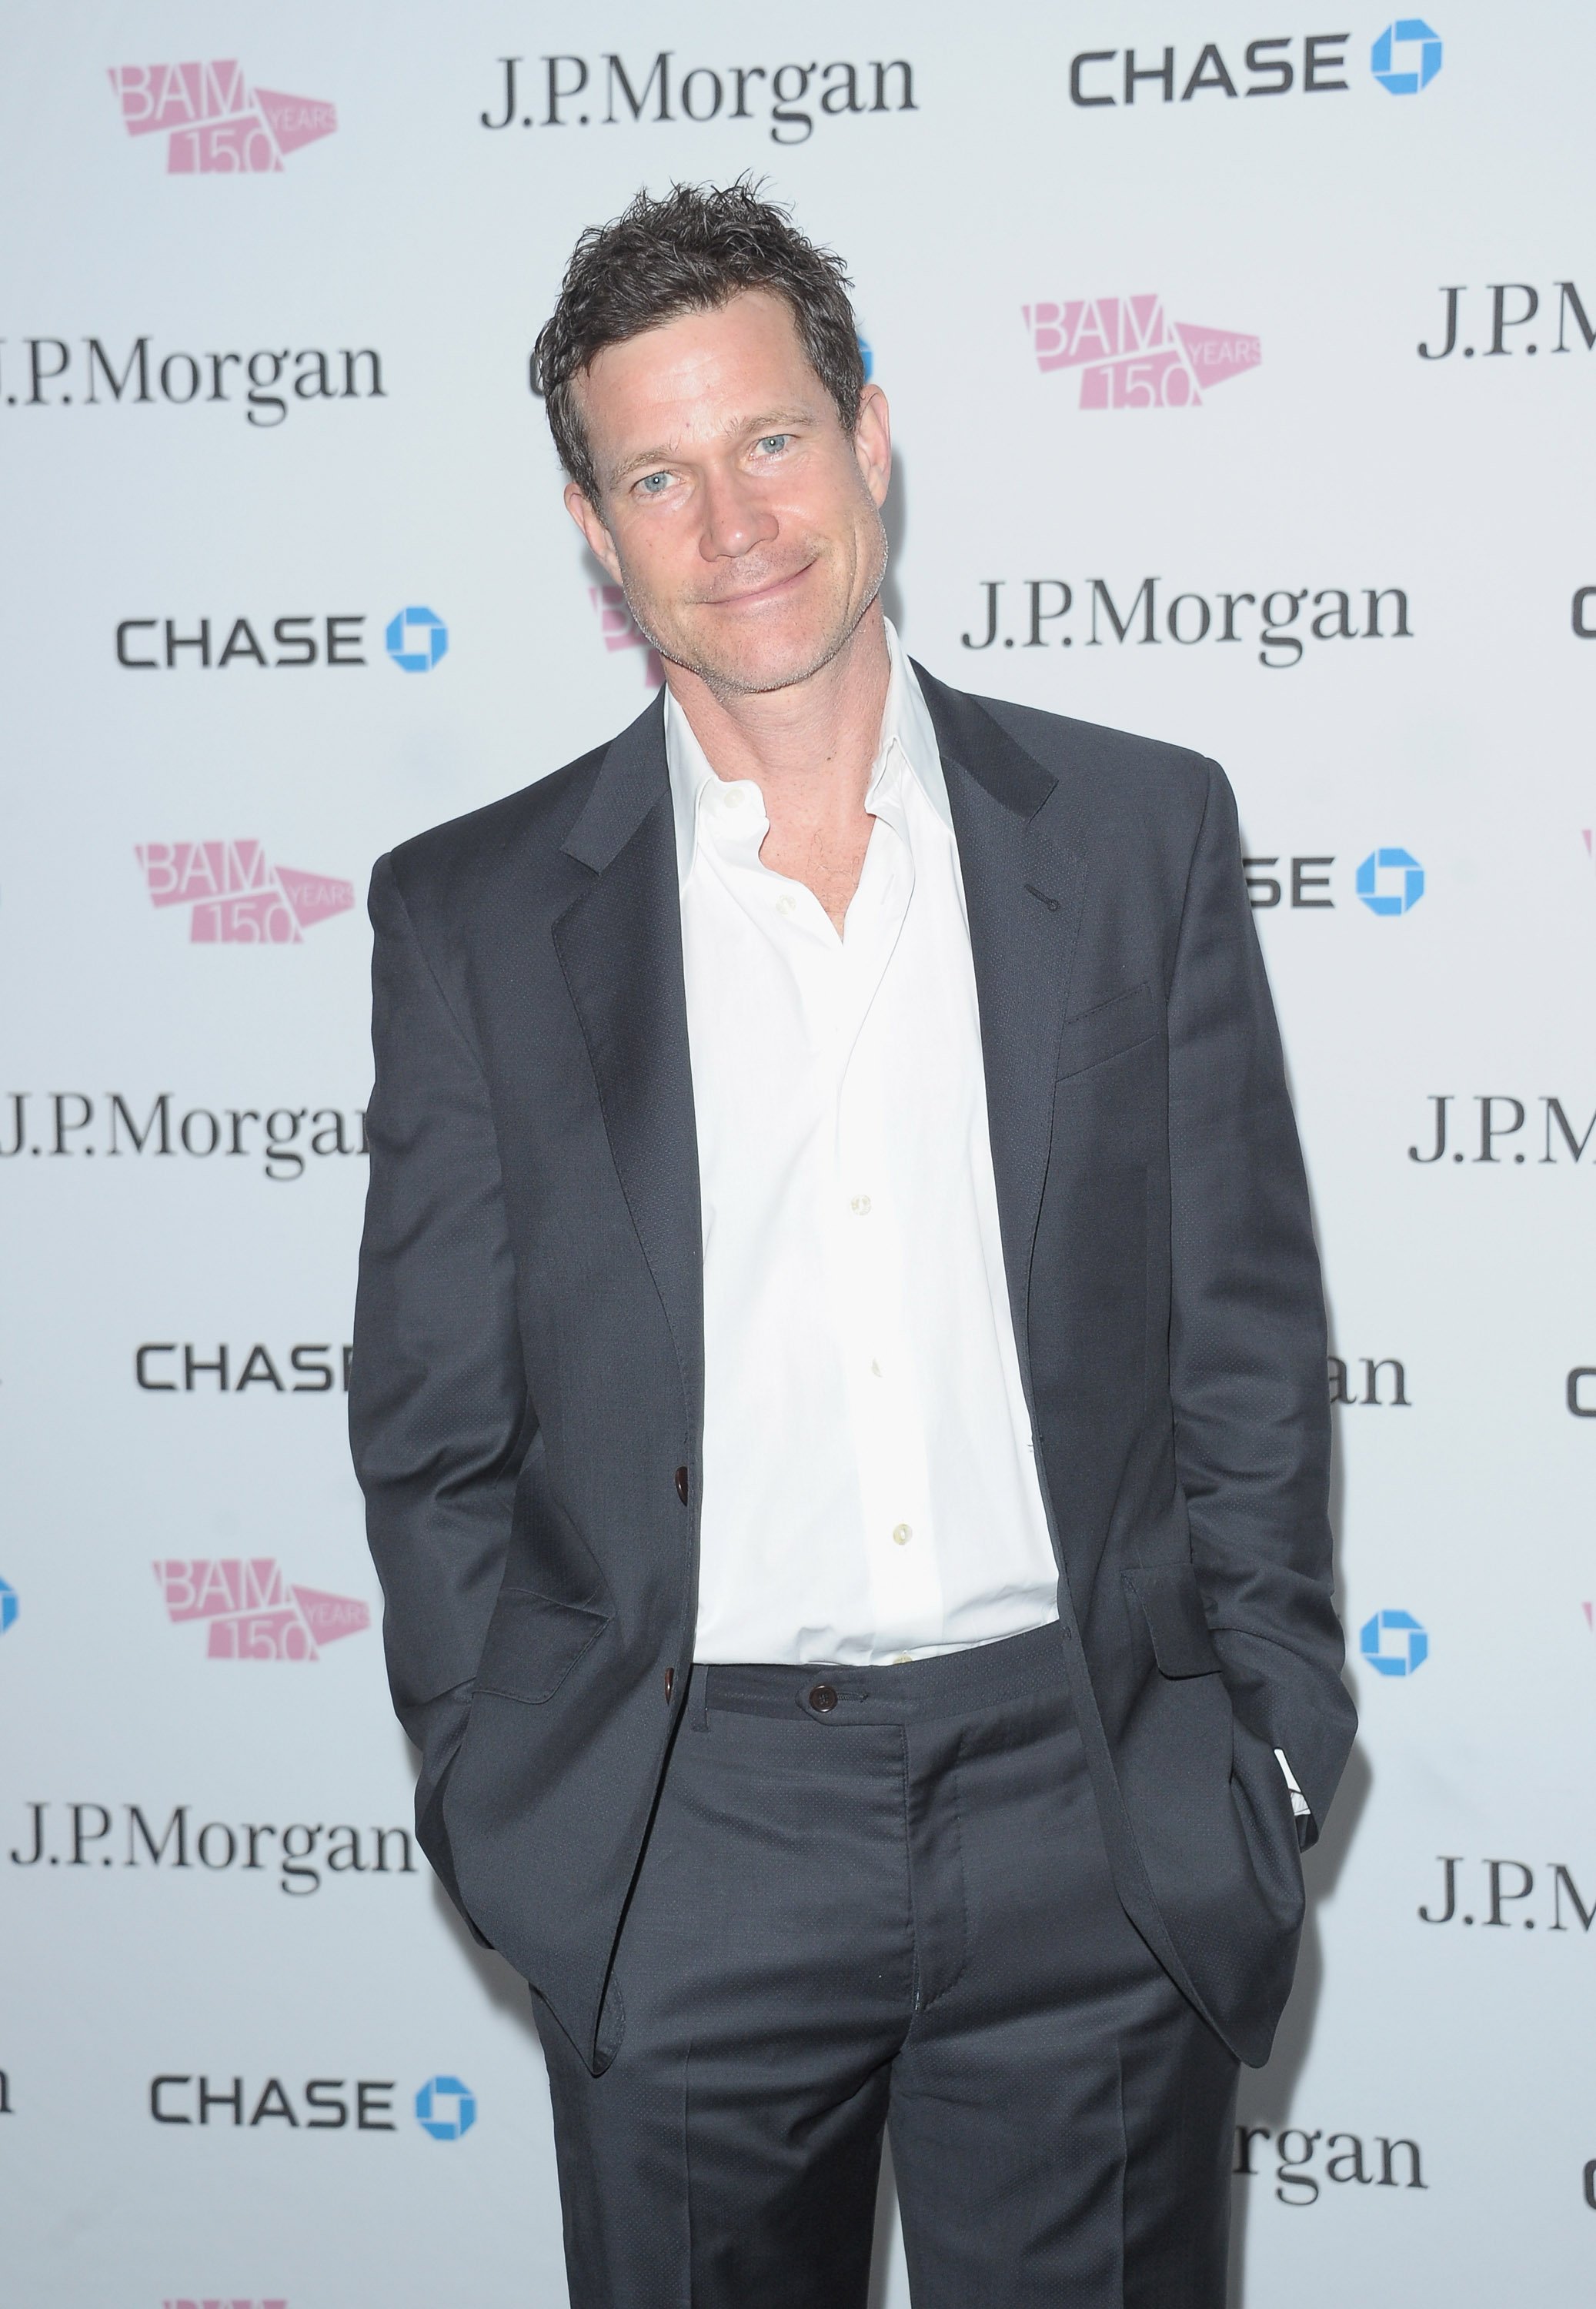 Dylan Walsh during the BAM 150th Anniversary gala. | Source: Getty Images